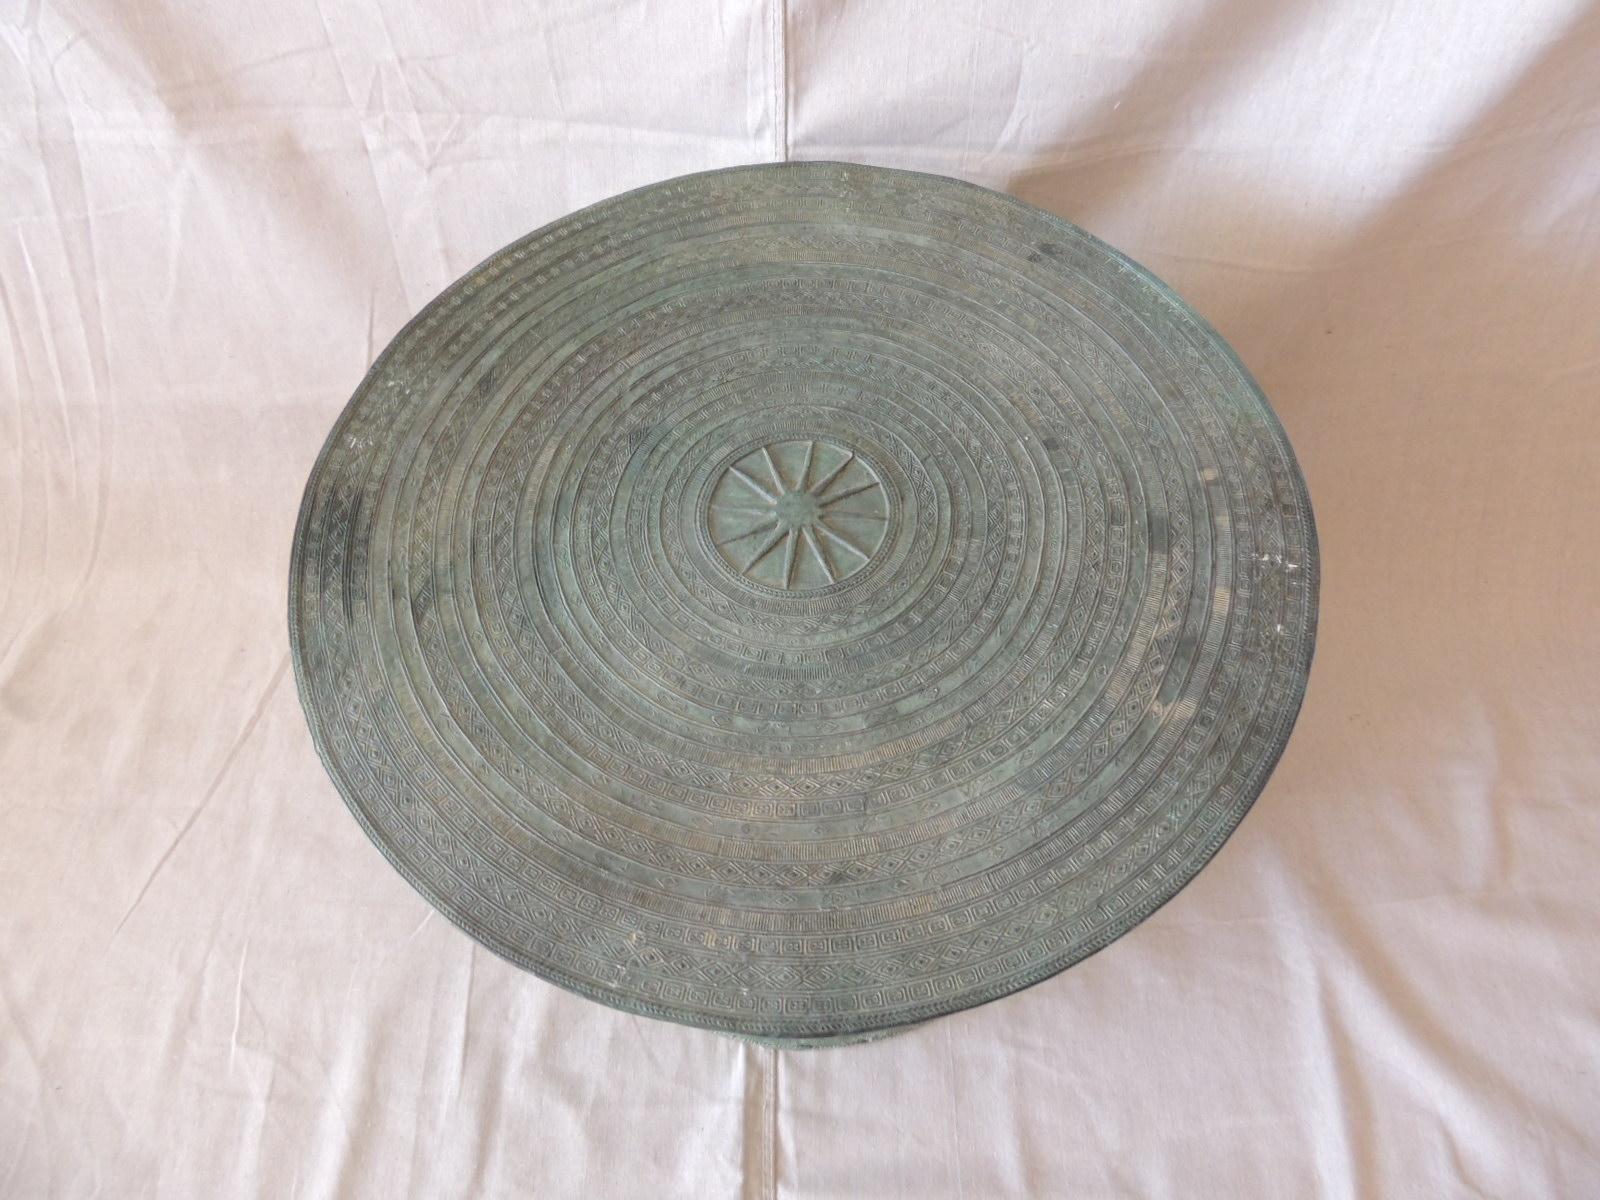 Burmese bronze Karen rain drum with intricate decoration on the top and around the body of the drum with four two handles on each side. These drums are also referred to as frog drums and have been used for hundreds of years in various tribal rituals